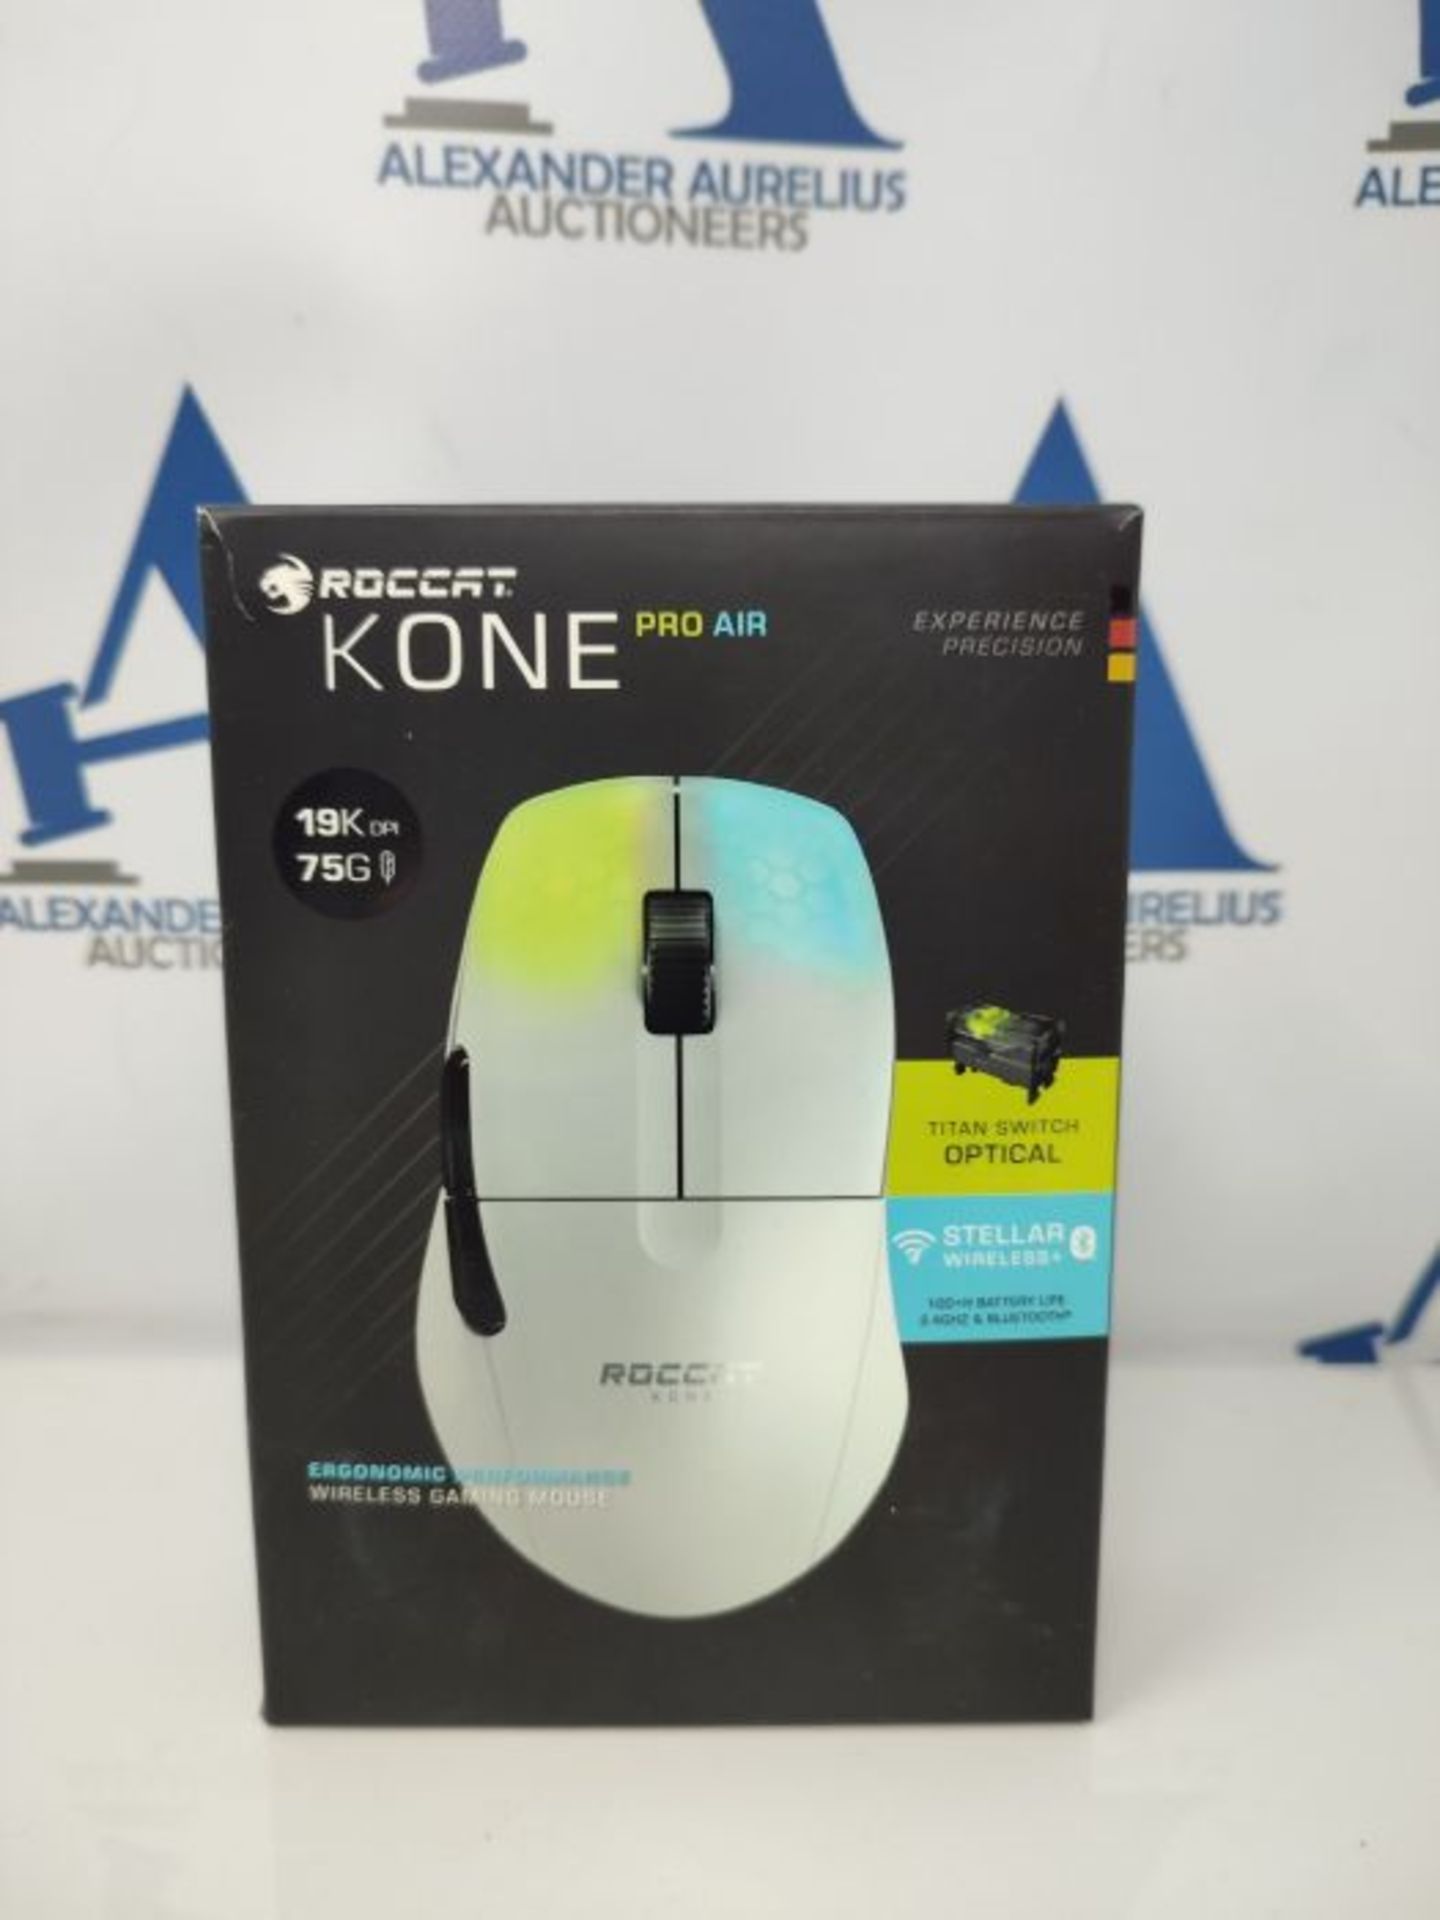 RRP £106.00 ROCCAT Kone Pro Air Ergonomic High Performance Wireless Gaming Mouse, White - Image 2 of 3